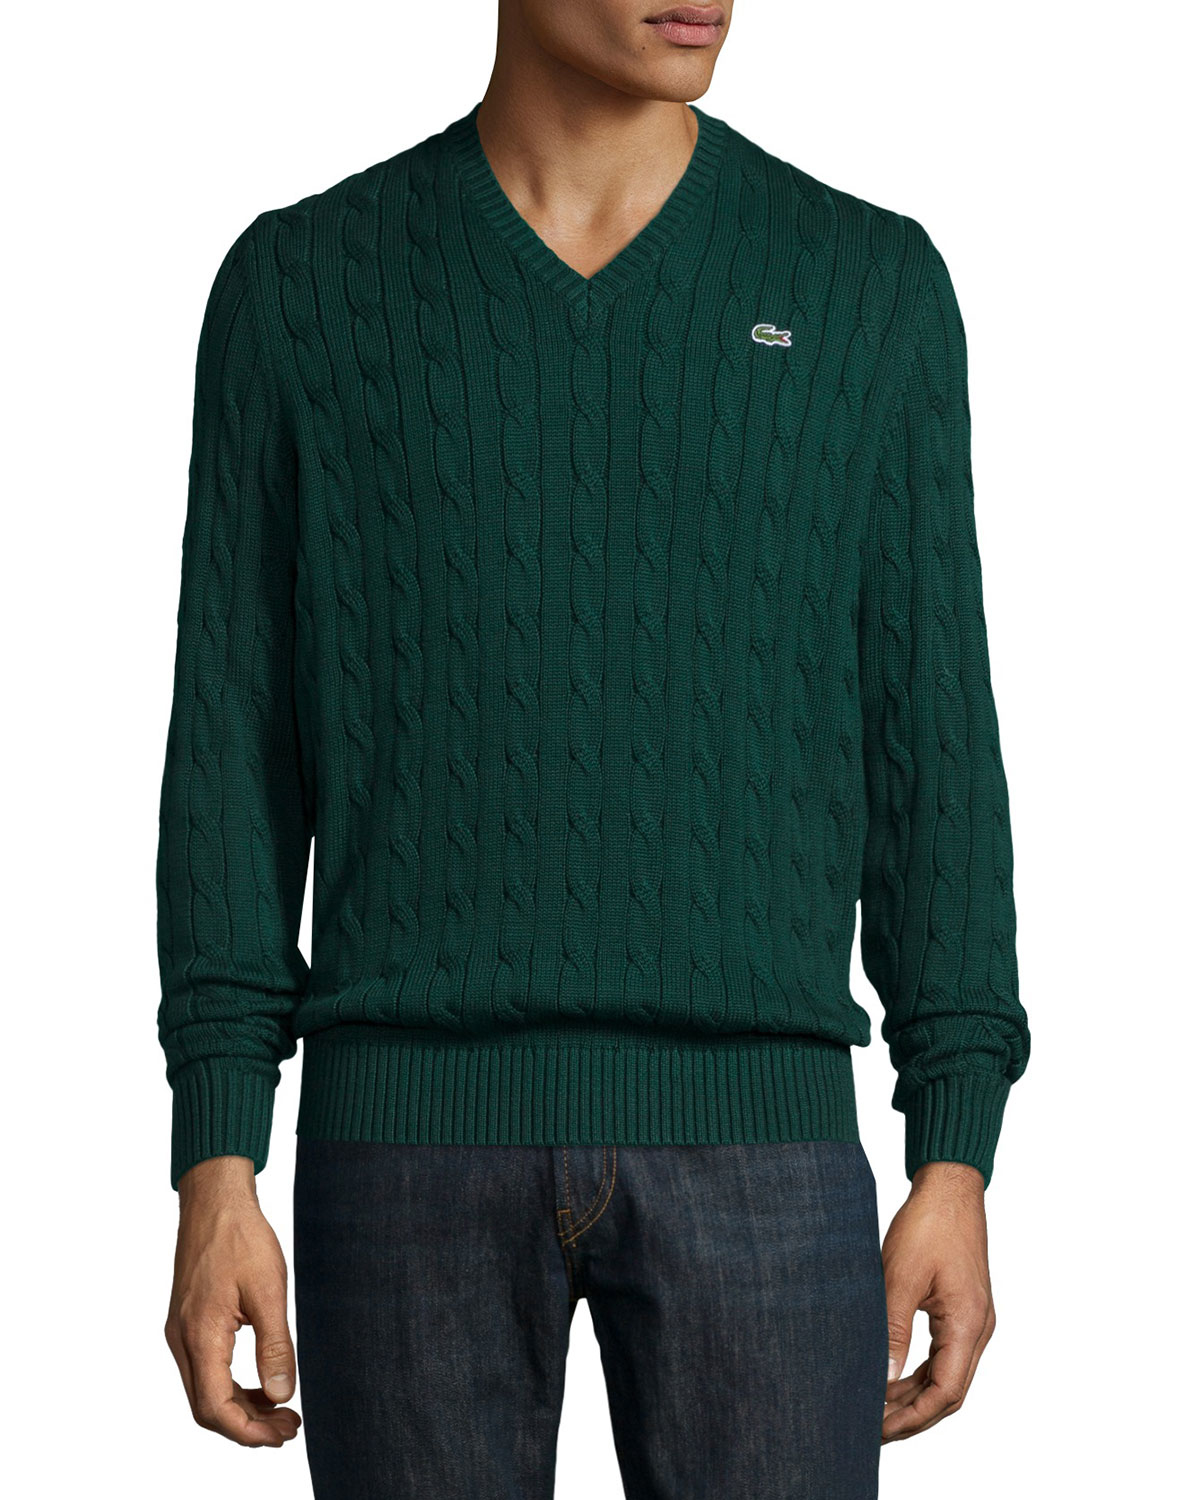 Lyst - Lacoste Cable-knit Cotton V-neck Sweater in Green for Men